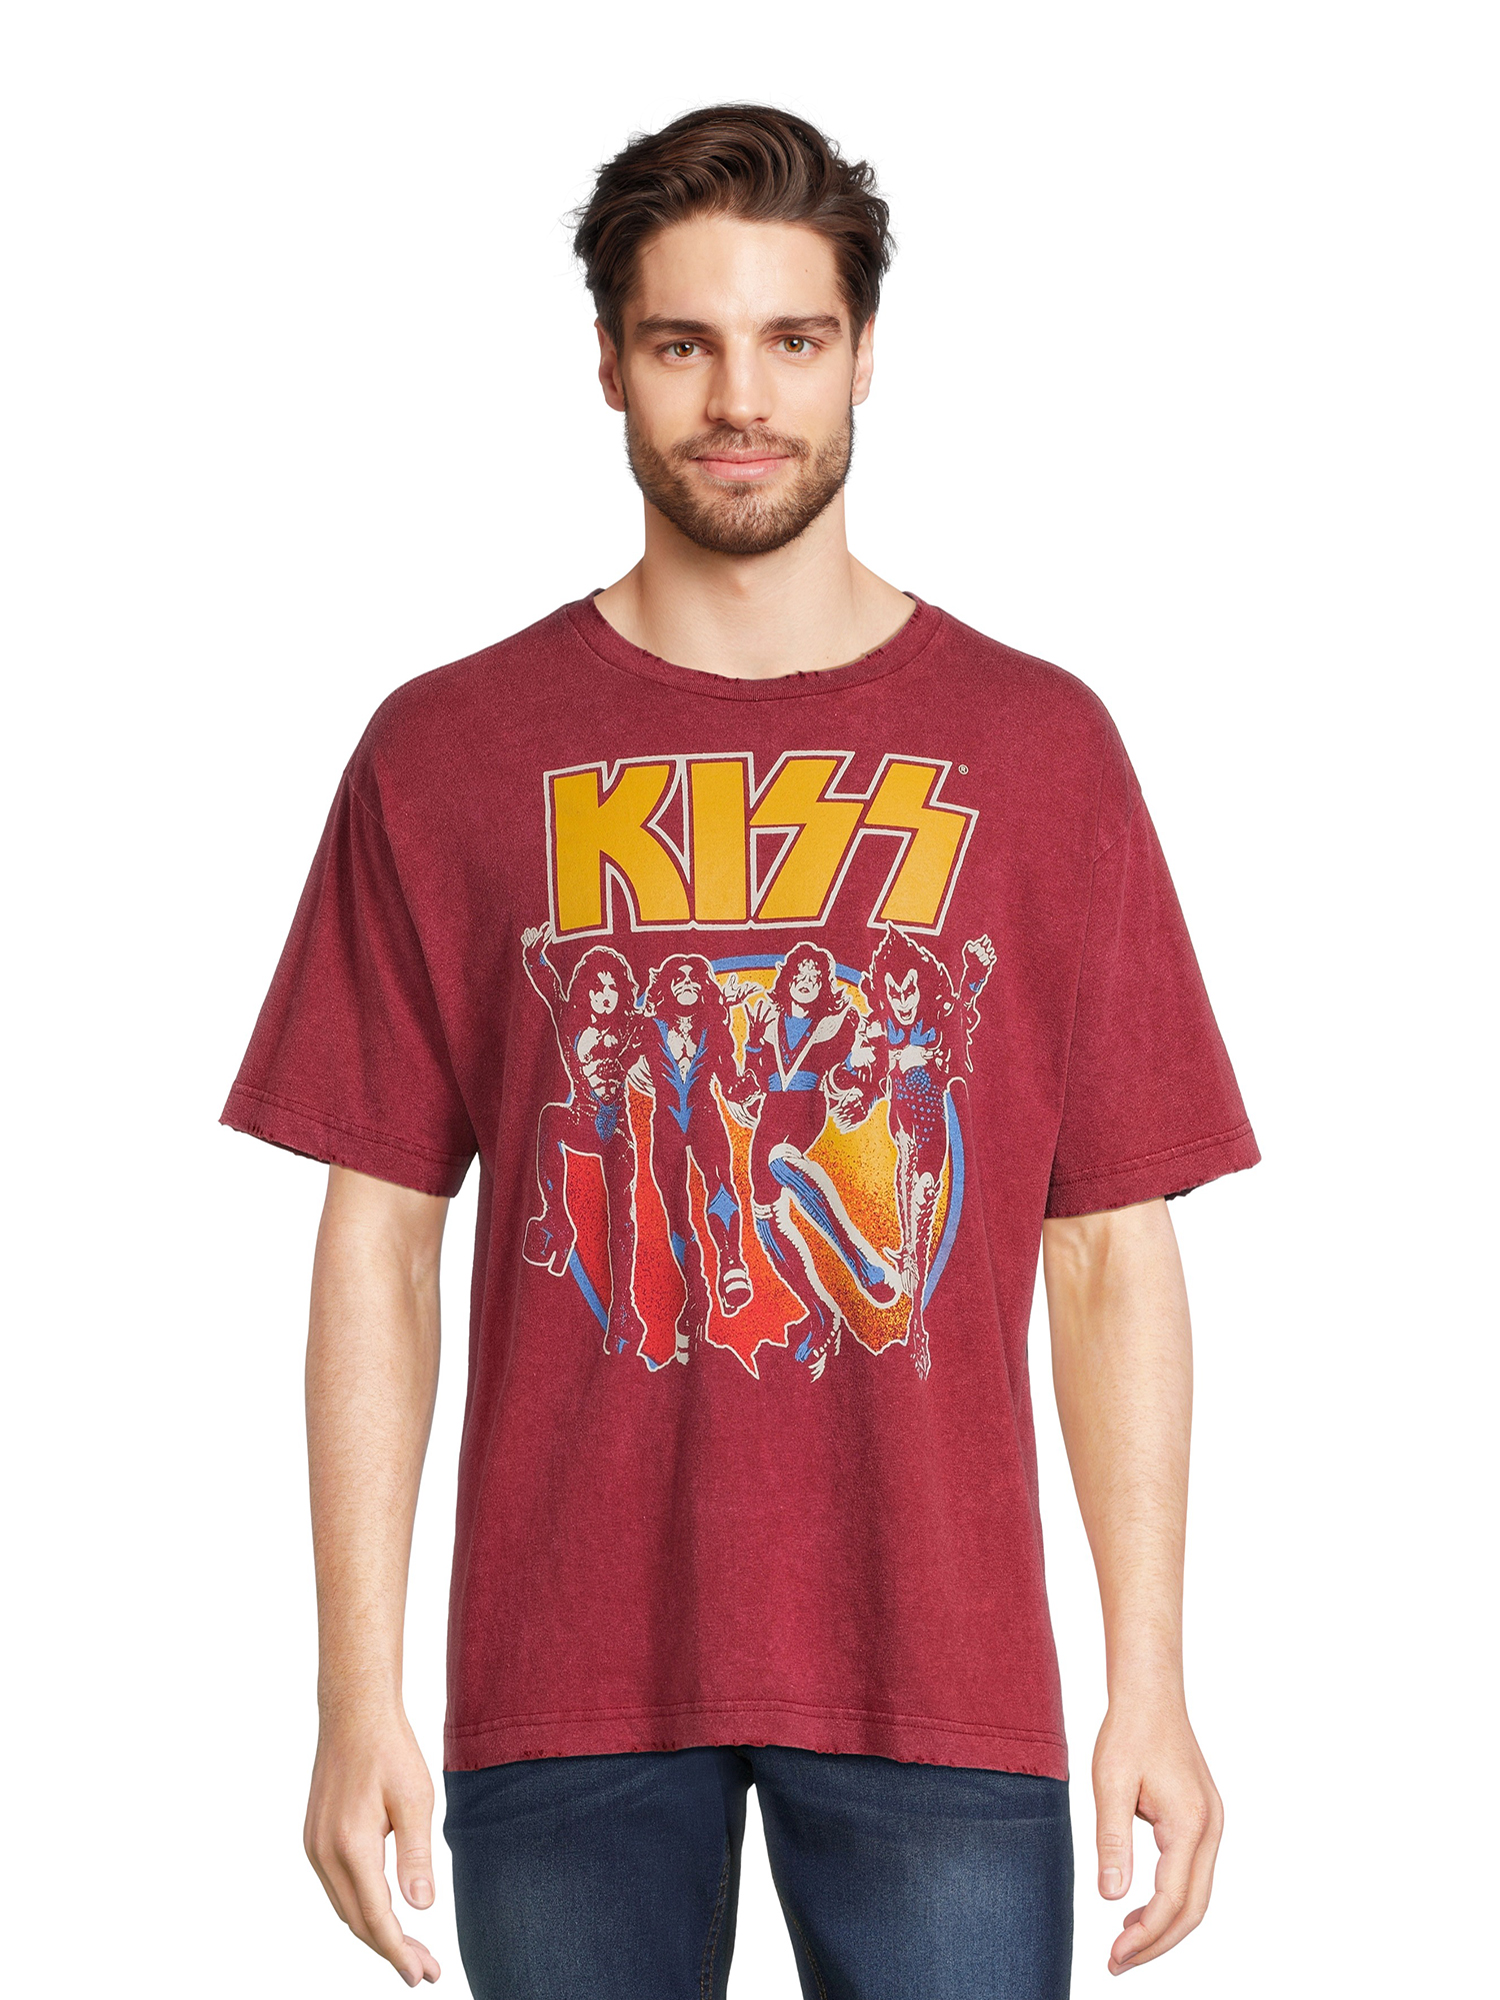 Kiss Men's & Big Men's Greatest Hits Graphic Band Tee, Size Xs-3xl